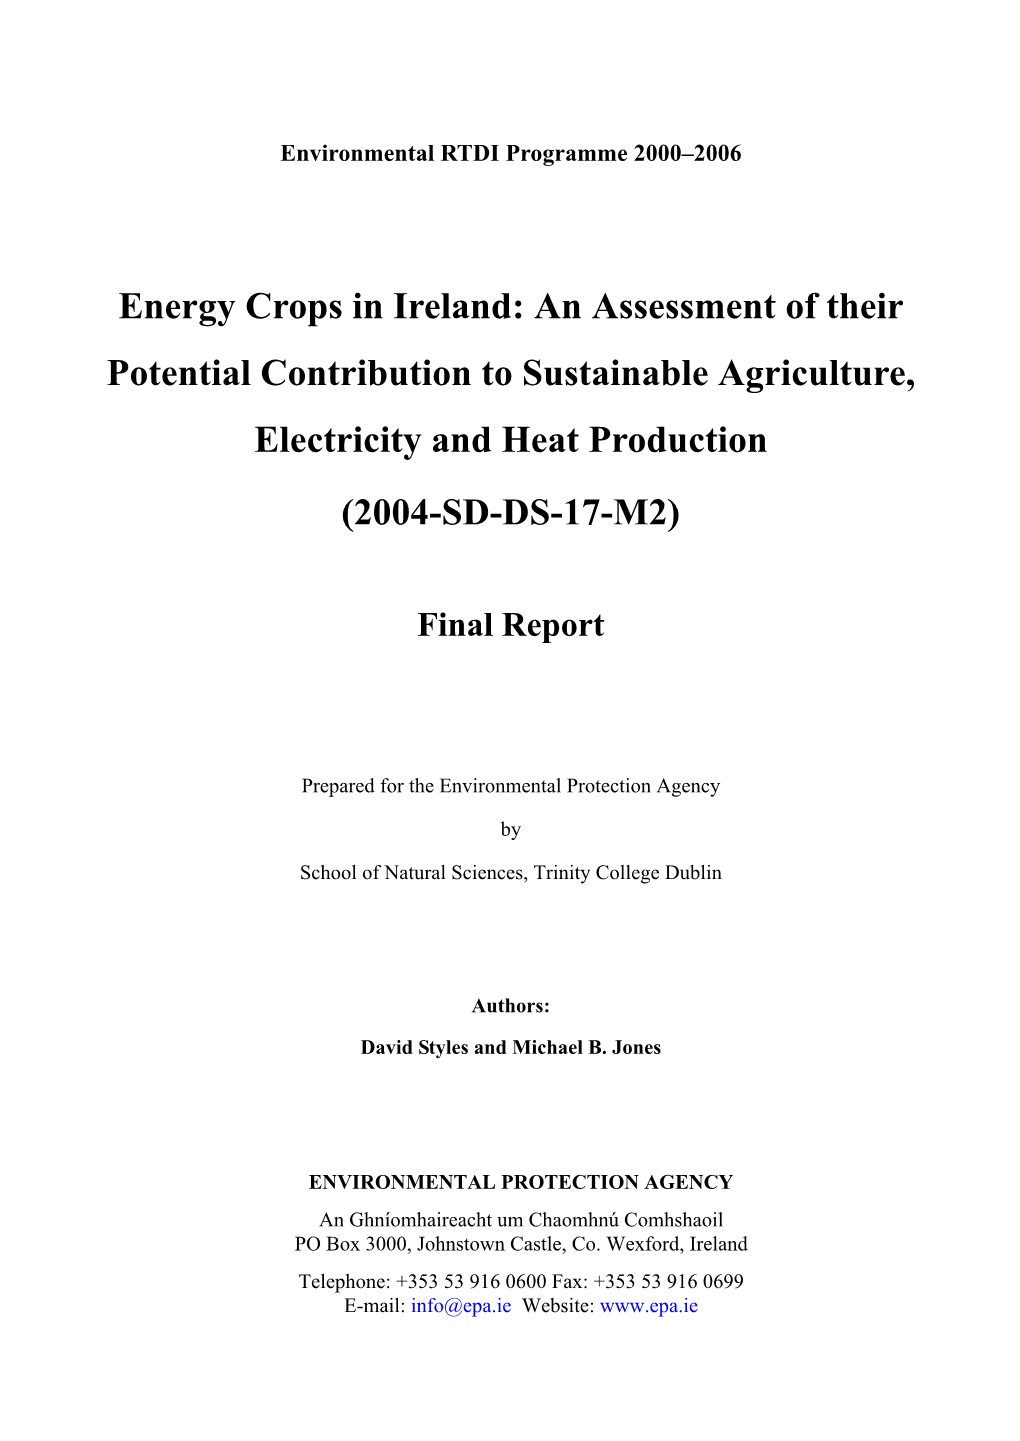 Energy Crops in Ireland: an Assessment of Their Potential Contribution to Sustainable Agriculture, Electricity and Heat Production (2004-SD-DS-17-M2)